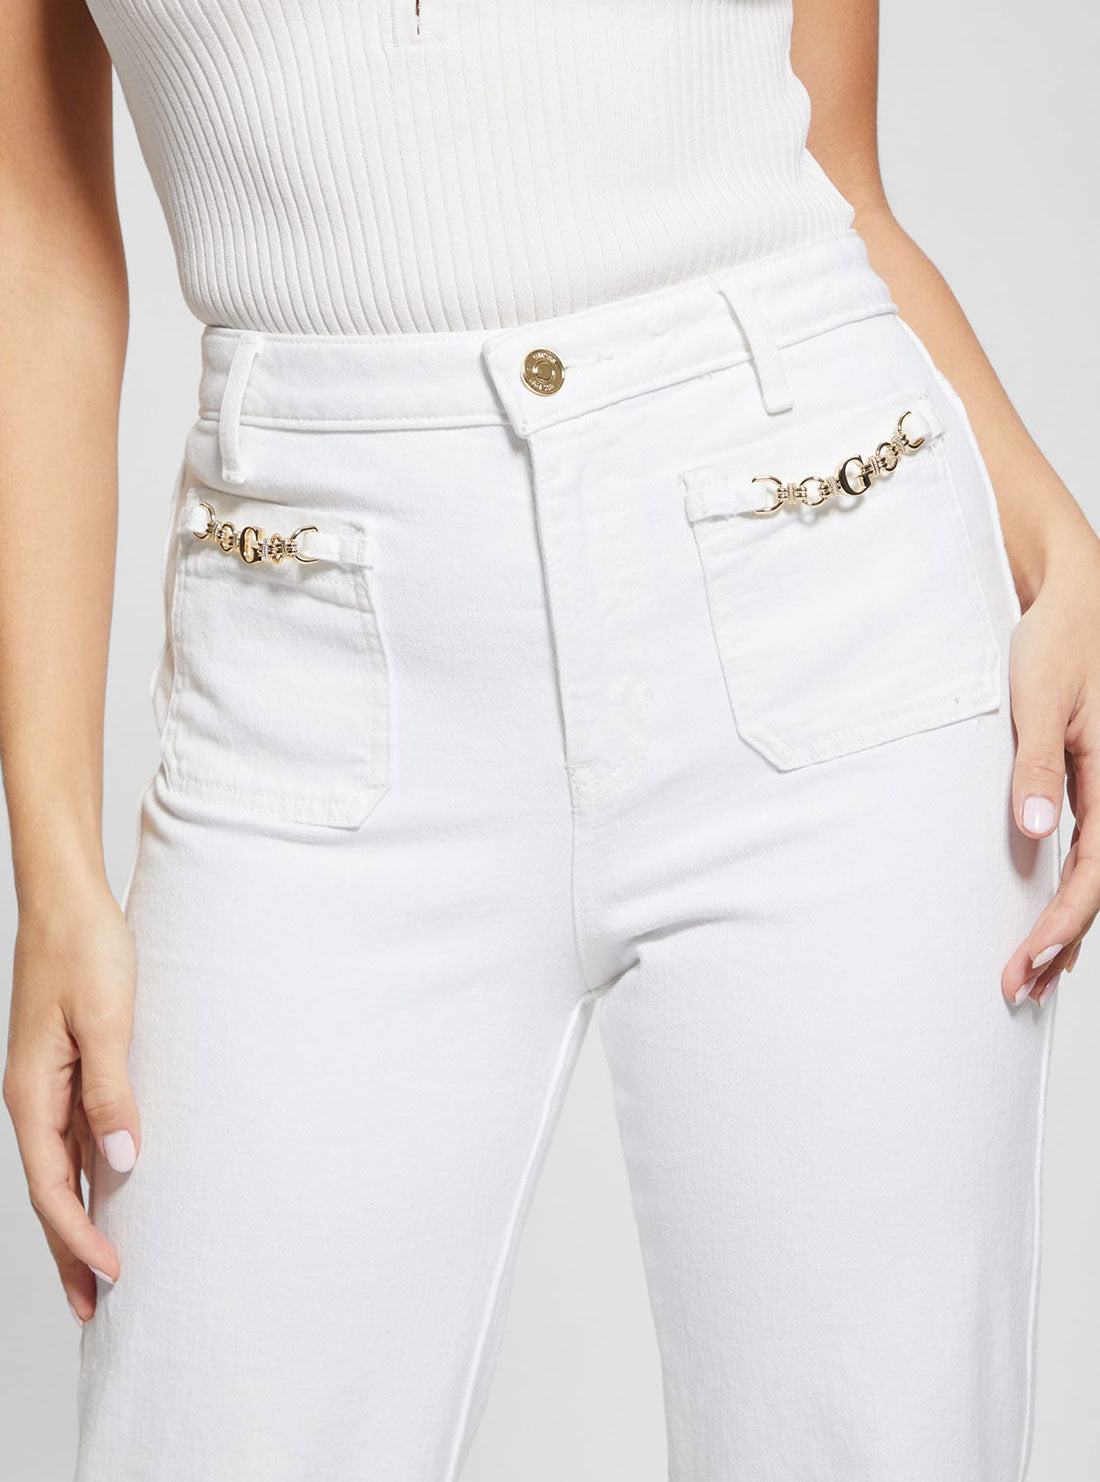 GUESS High-Rise Straight Leg Relaxed Jeans in White Wash detail view